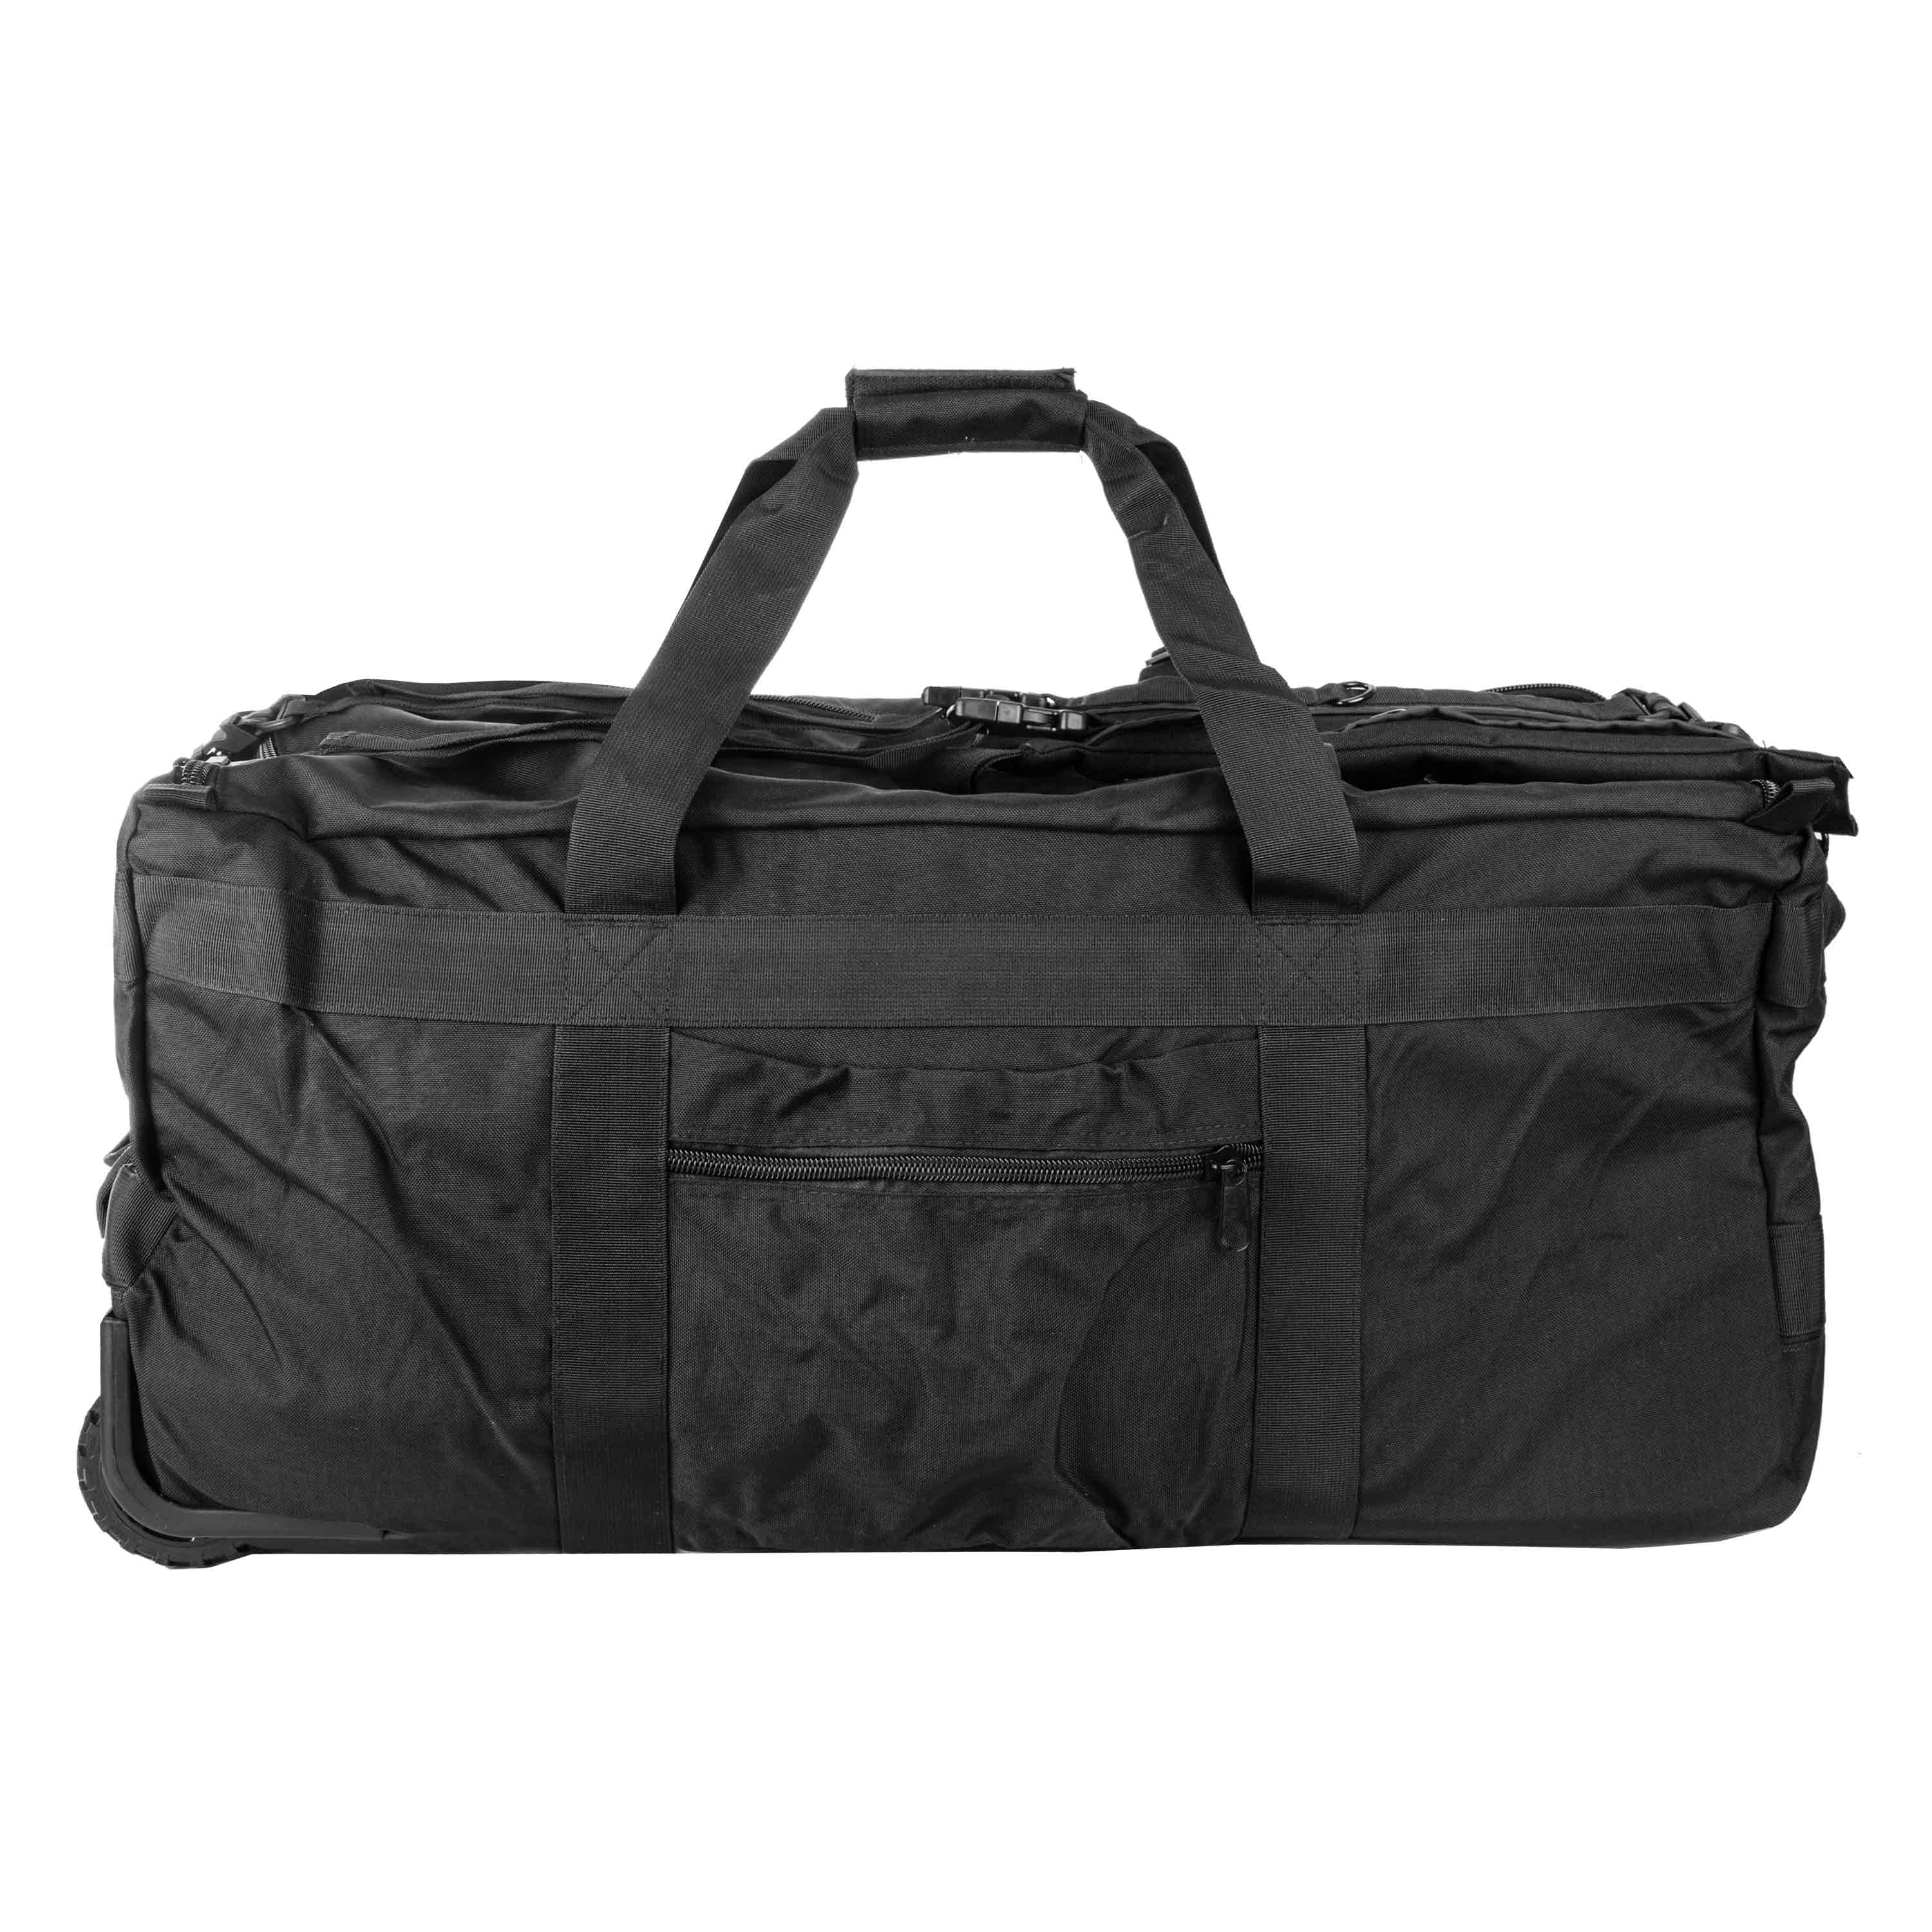 Mil-Tec Tactical Cargo Bag With Wheels black | Mil-Tec Tactical Cargo ...